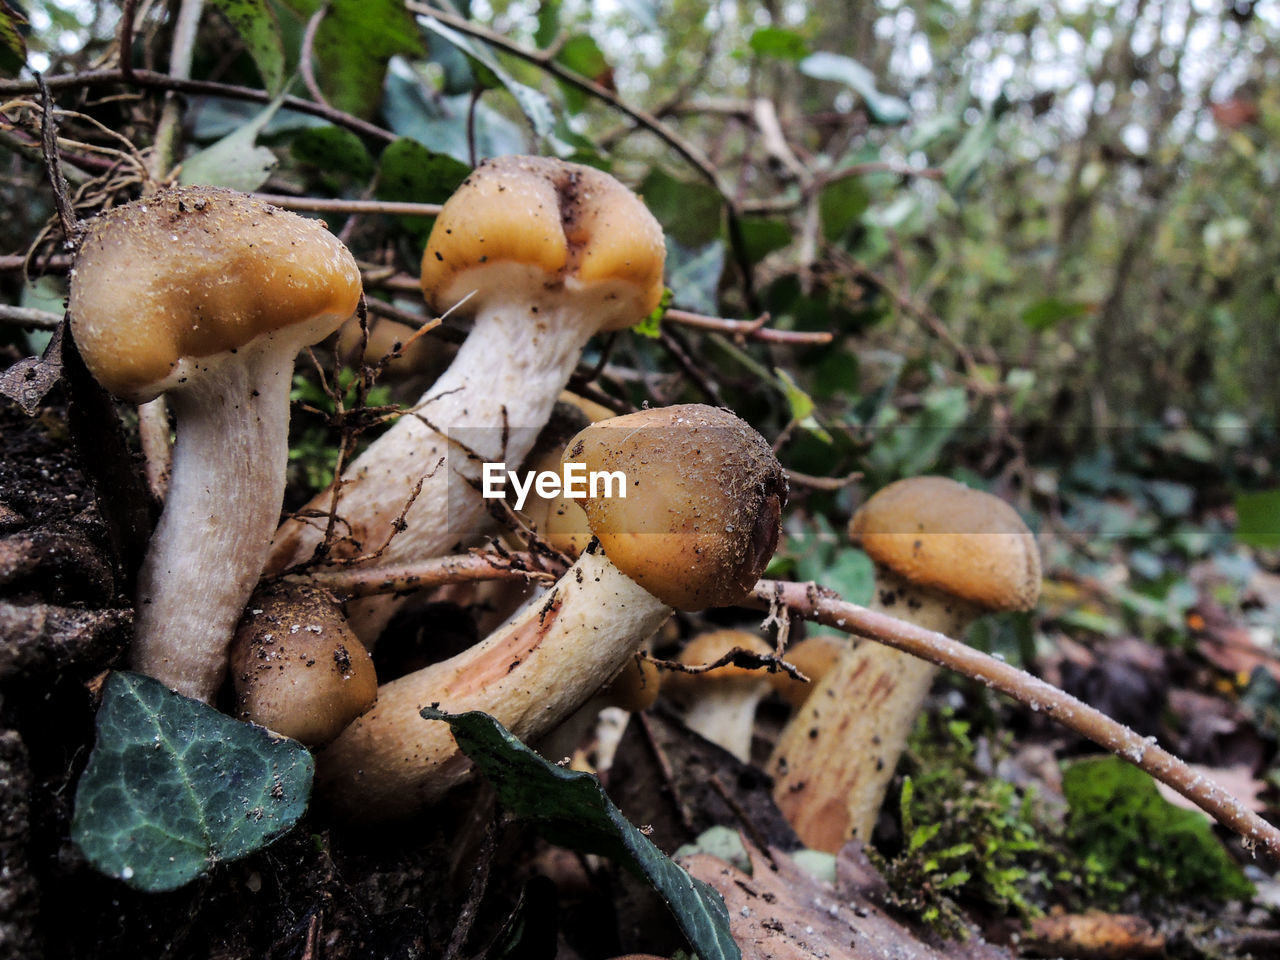 CLOSE-UP VIEW OF FUNGUS GROWING OUTDOORS